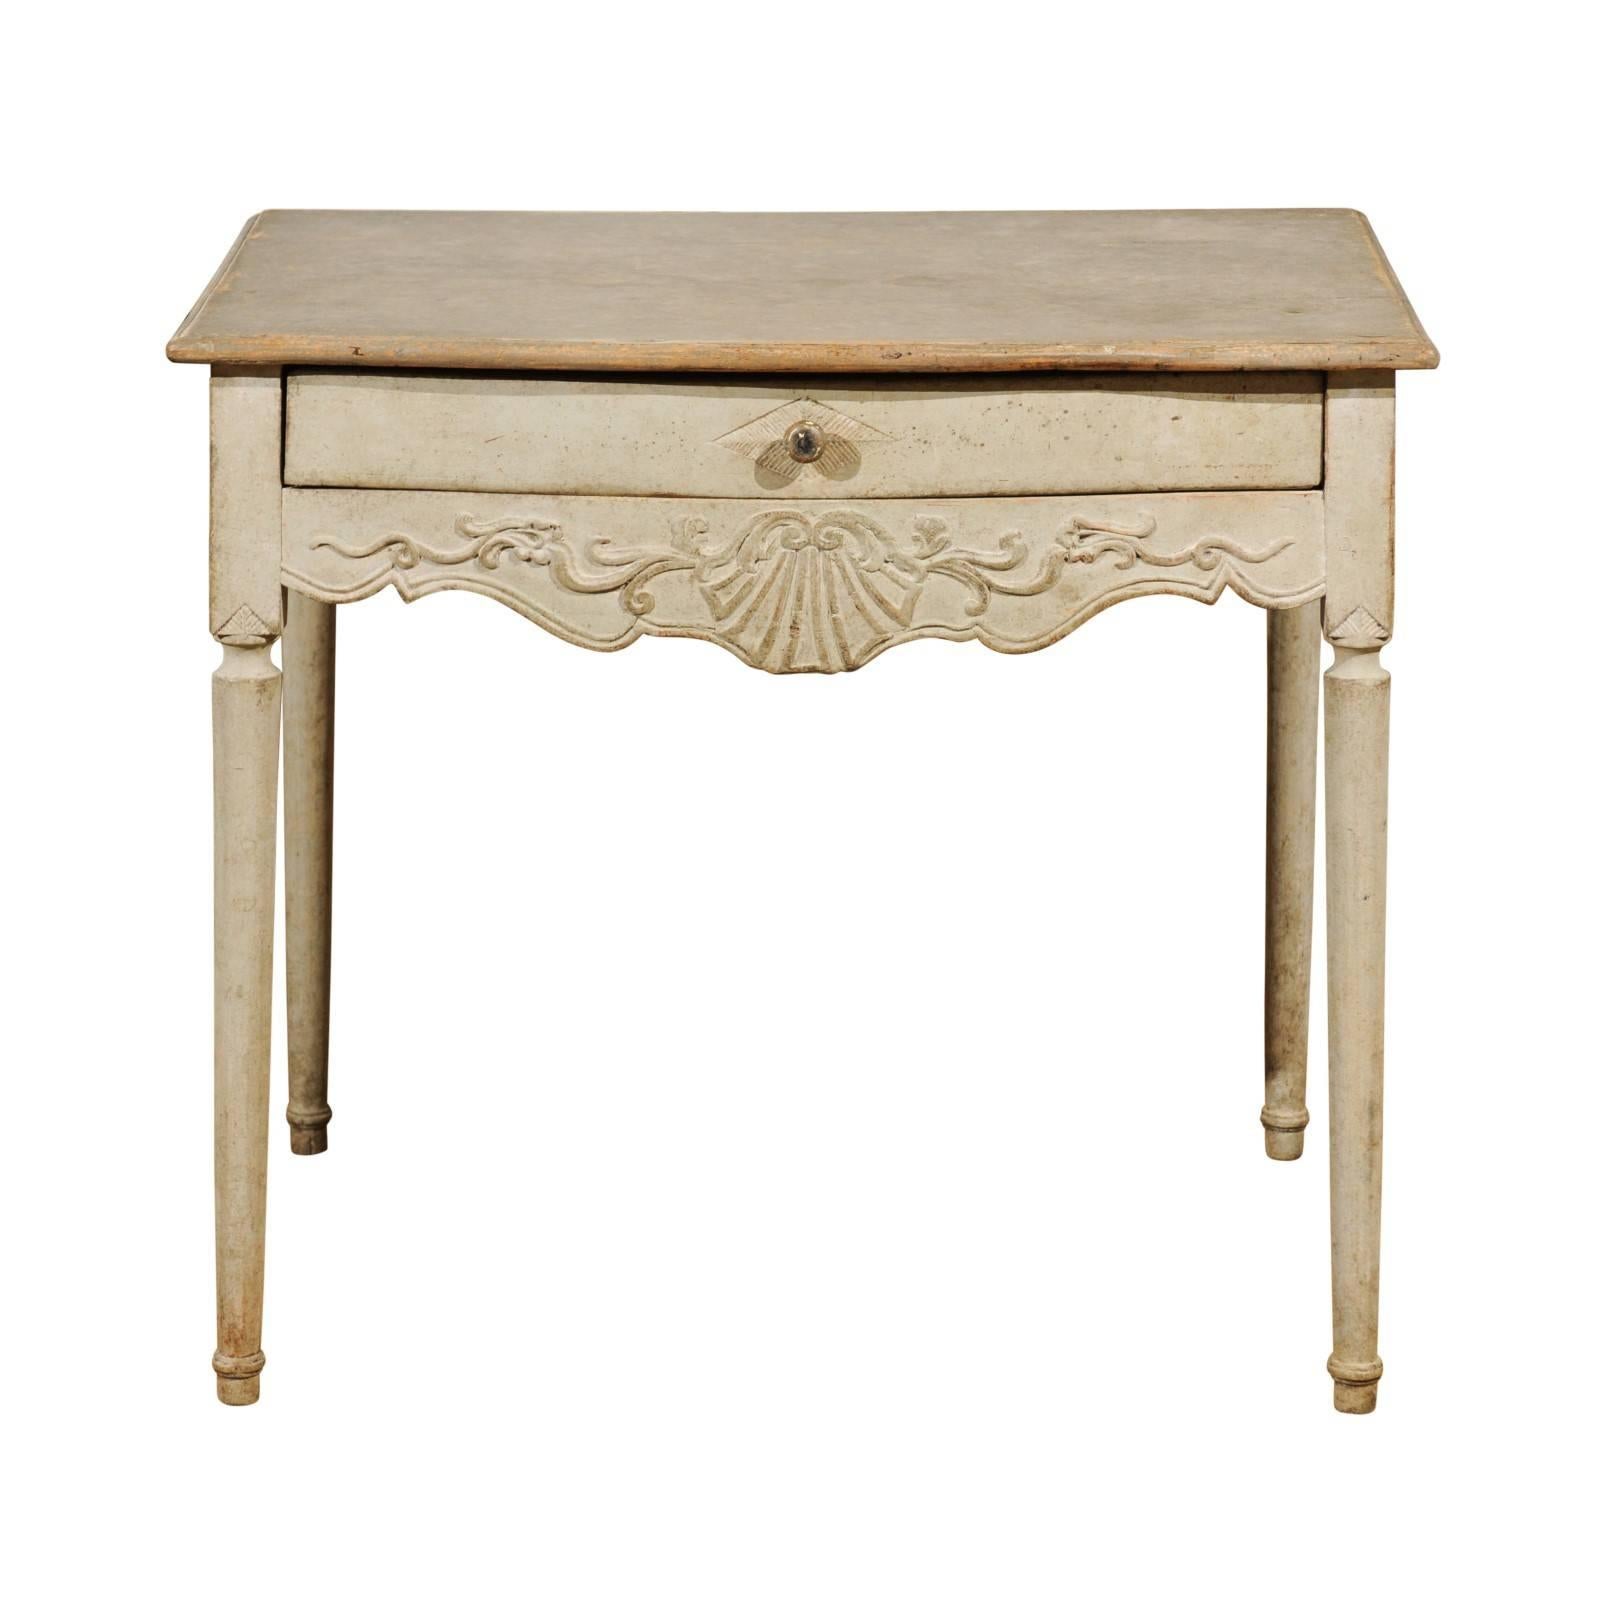 Swedish 1810s Period Gustavian Painted Side Table with Drawer and Carved Apron